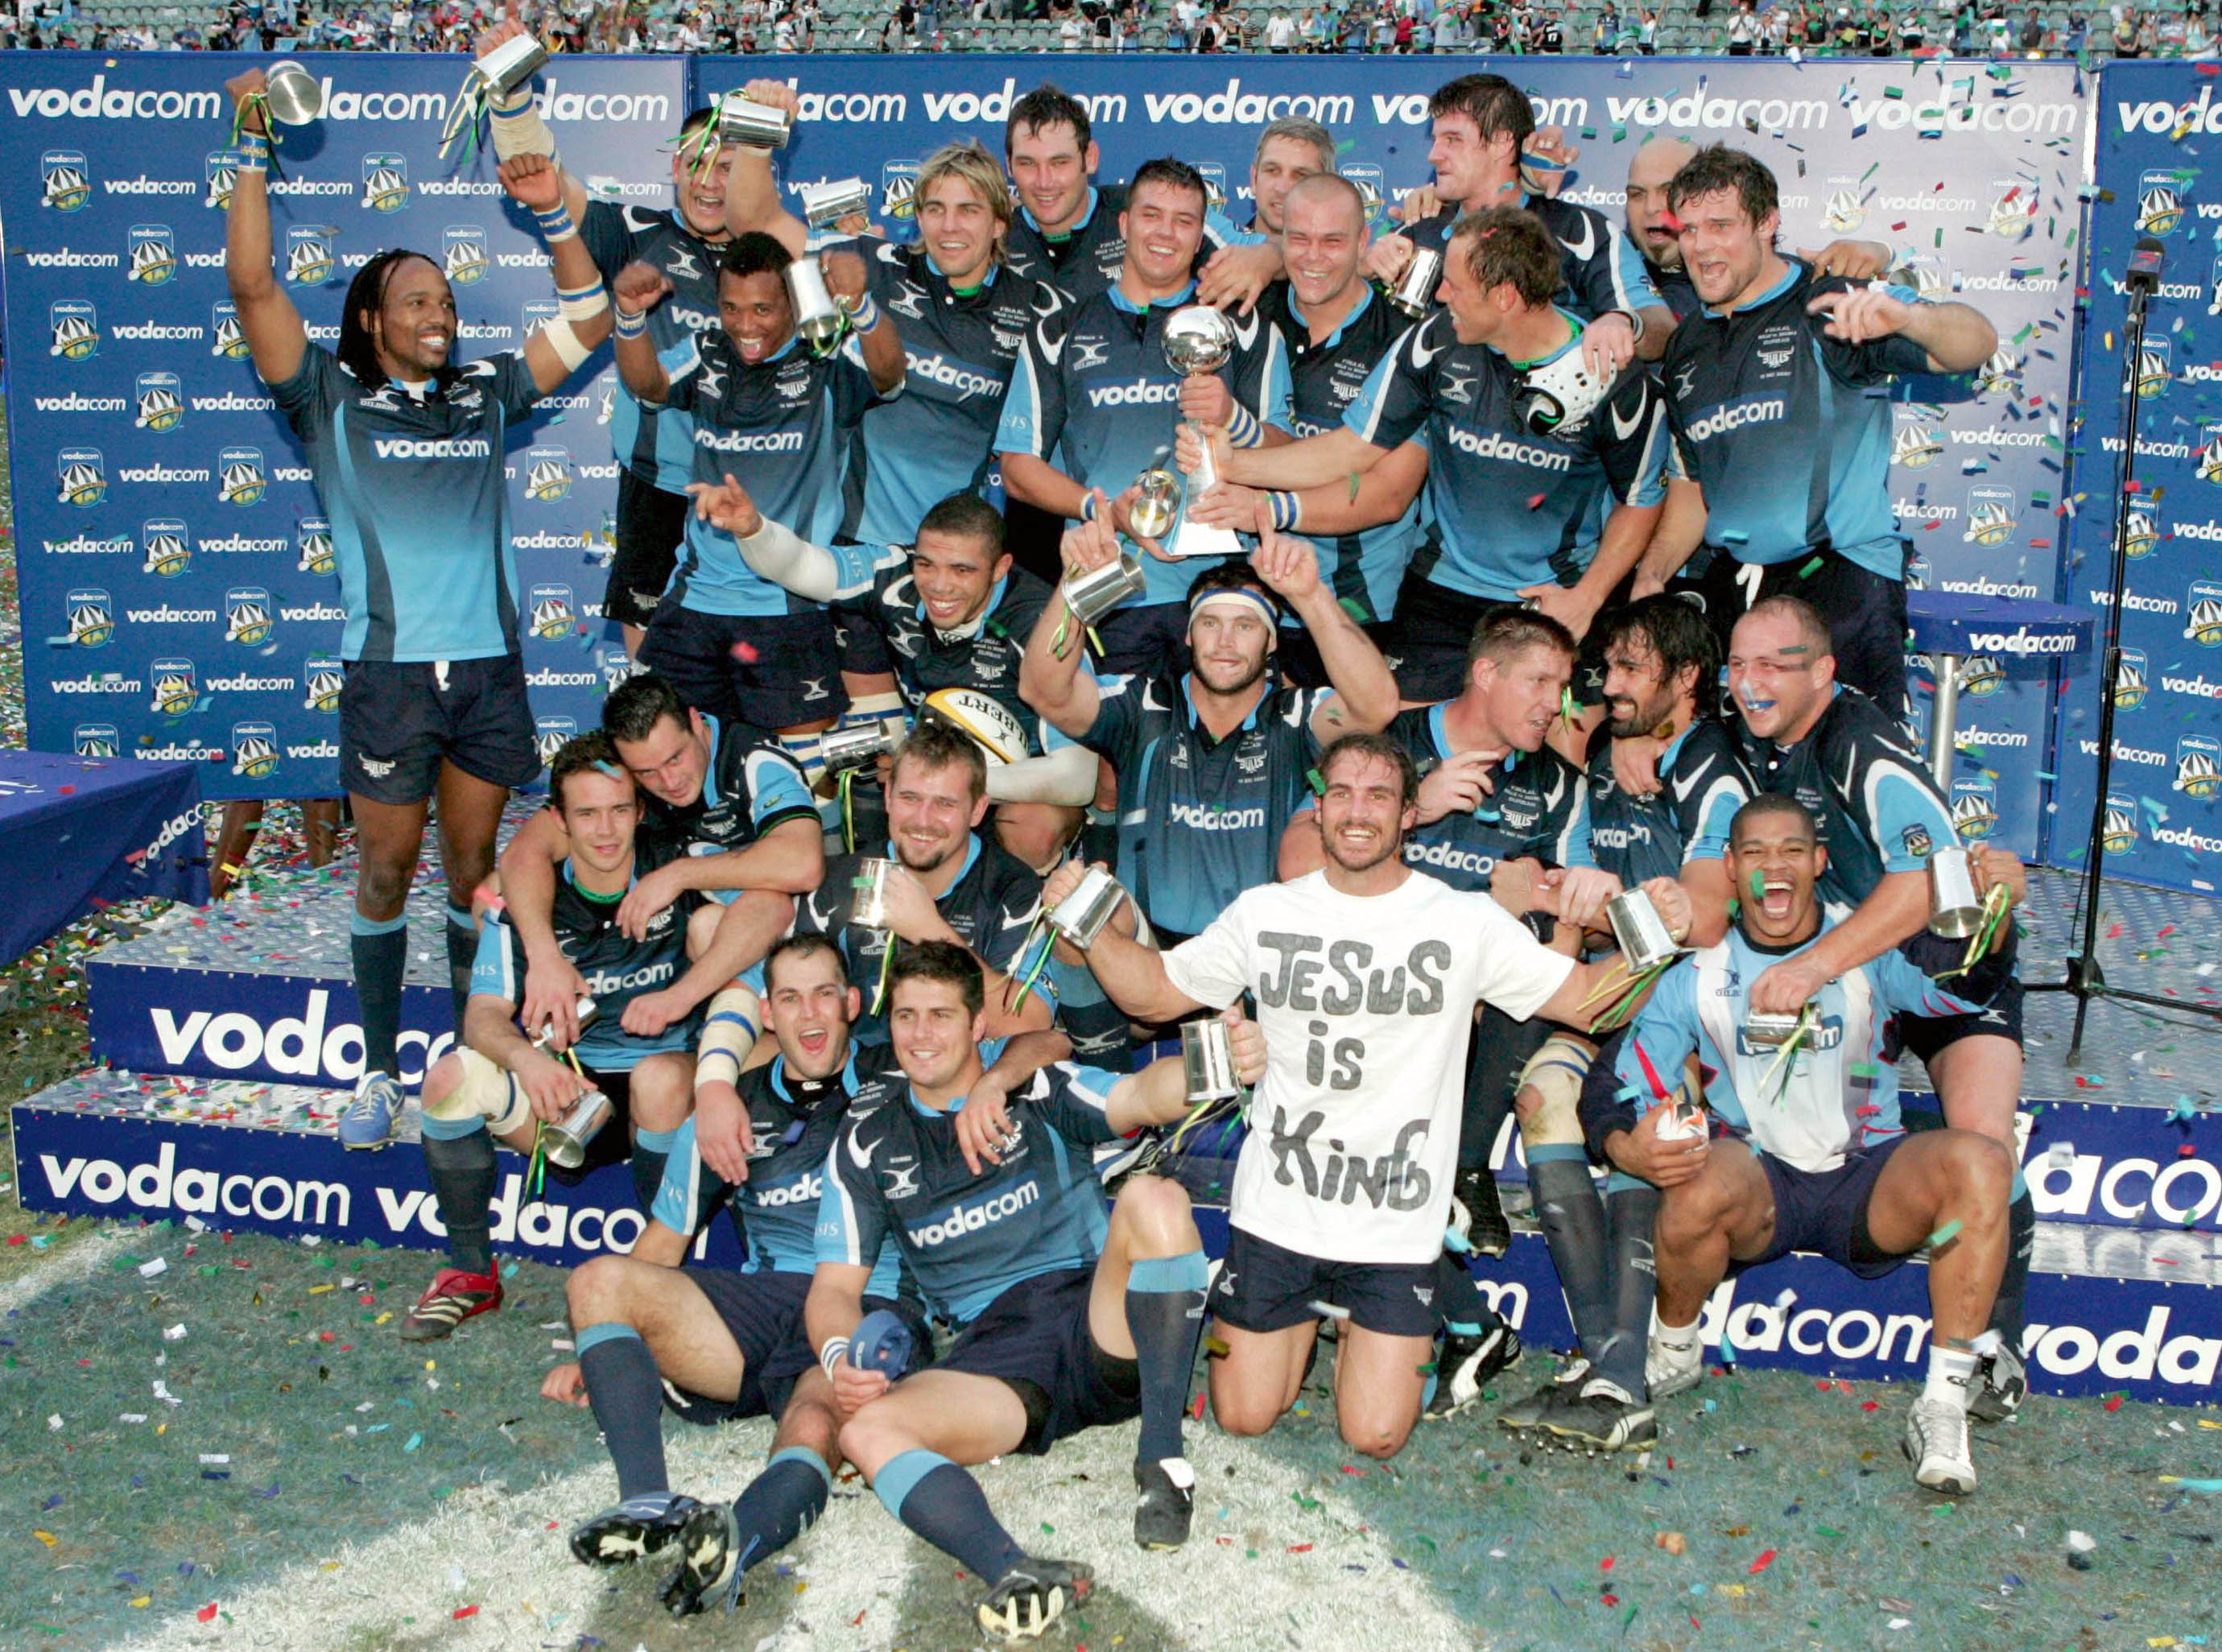 DURBAN, SOUTH AFRICA - MAY 19: Bulls players celebrate with the Super 14 trophy after the Super 14 Final match between the Sharks and the Bulls held at the Absa Stadium on May 19, 2007 in Durban, South Africa. (Photo by Duif du Toit/Gallo Images/Getty Images)